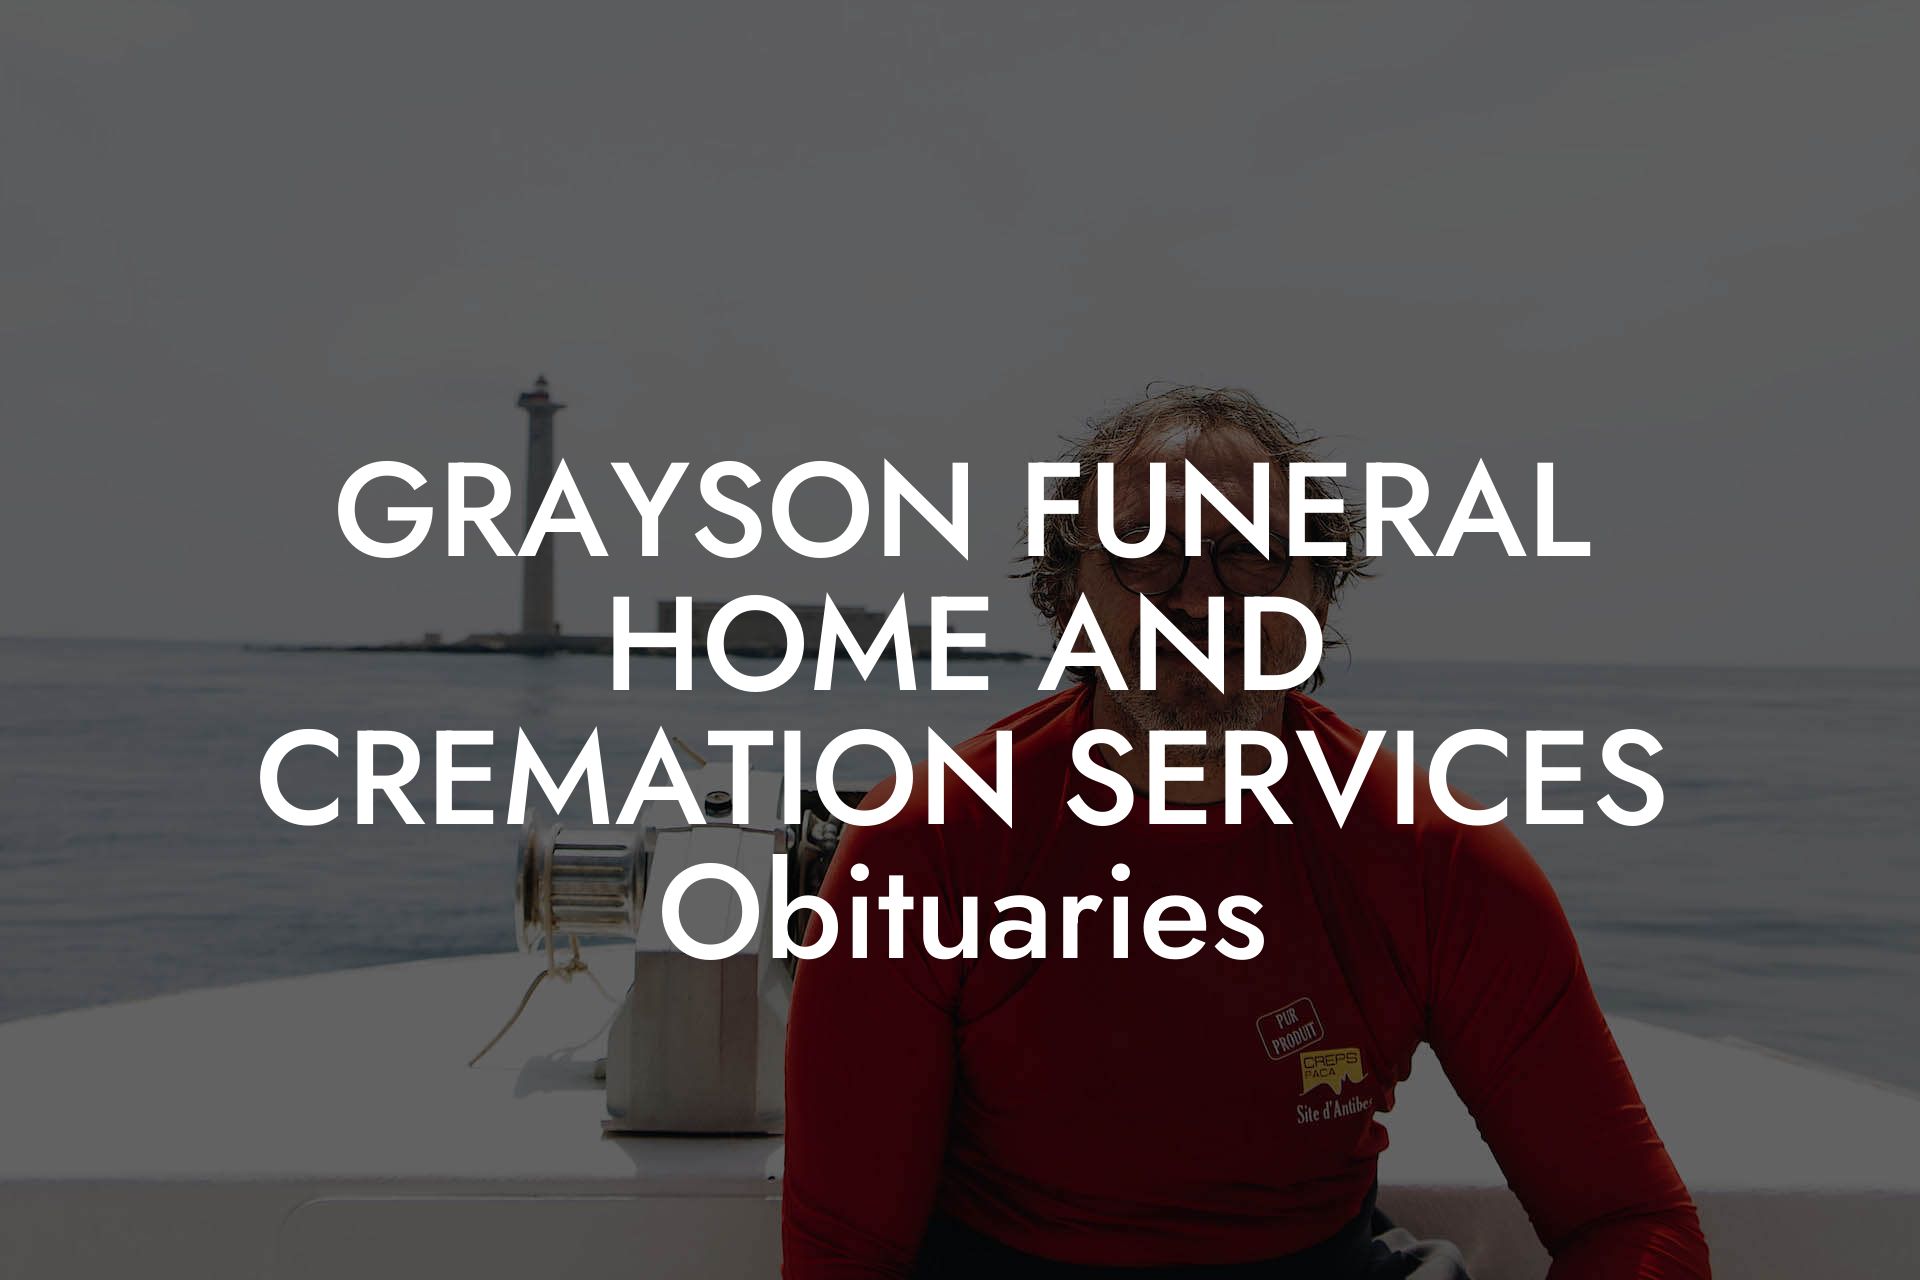 GRAYSON FUNERAL HOME AND CREMATION SERVICES Obituaries